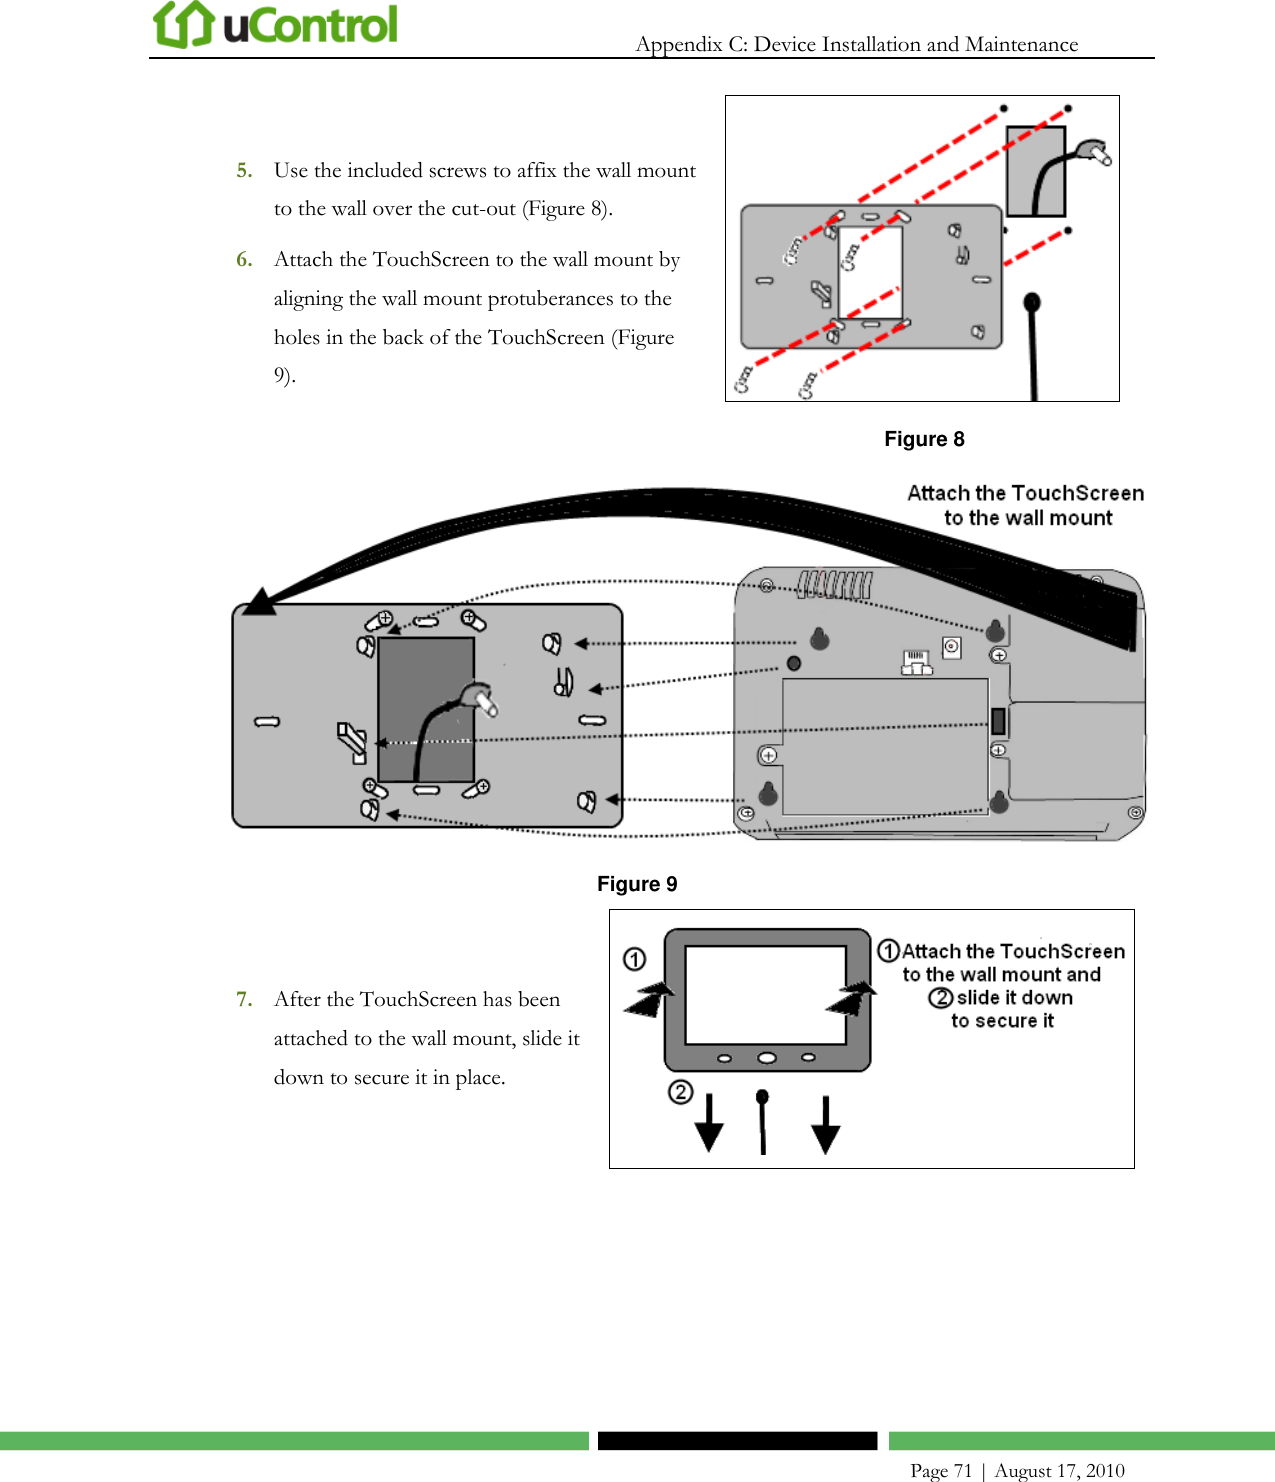   Appendix C: Device Installation and Maintenance    Page 71 | August 17, 2010 5. Use the included screws to affix the wall mount to the wall over the cut-out (Figure 8). 6. Attach the TouchScreen to the wall mount by aligning the wall mount protuberances to the holes in the back of the TouchScreen (Figure 9).  Figure 8  Figure 9 7. After the TouchScreen has been attached to the wall mount, slide it down to secure it in place.  